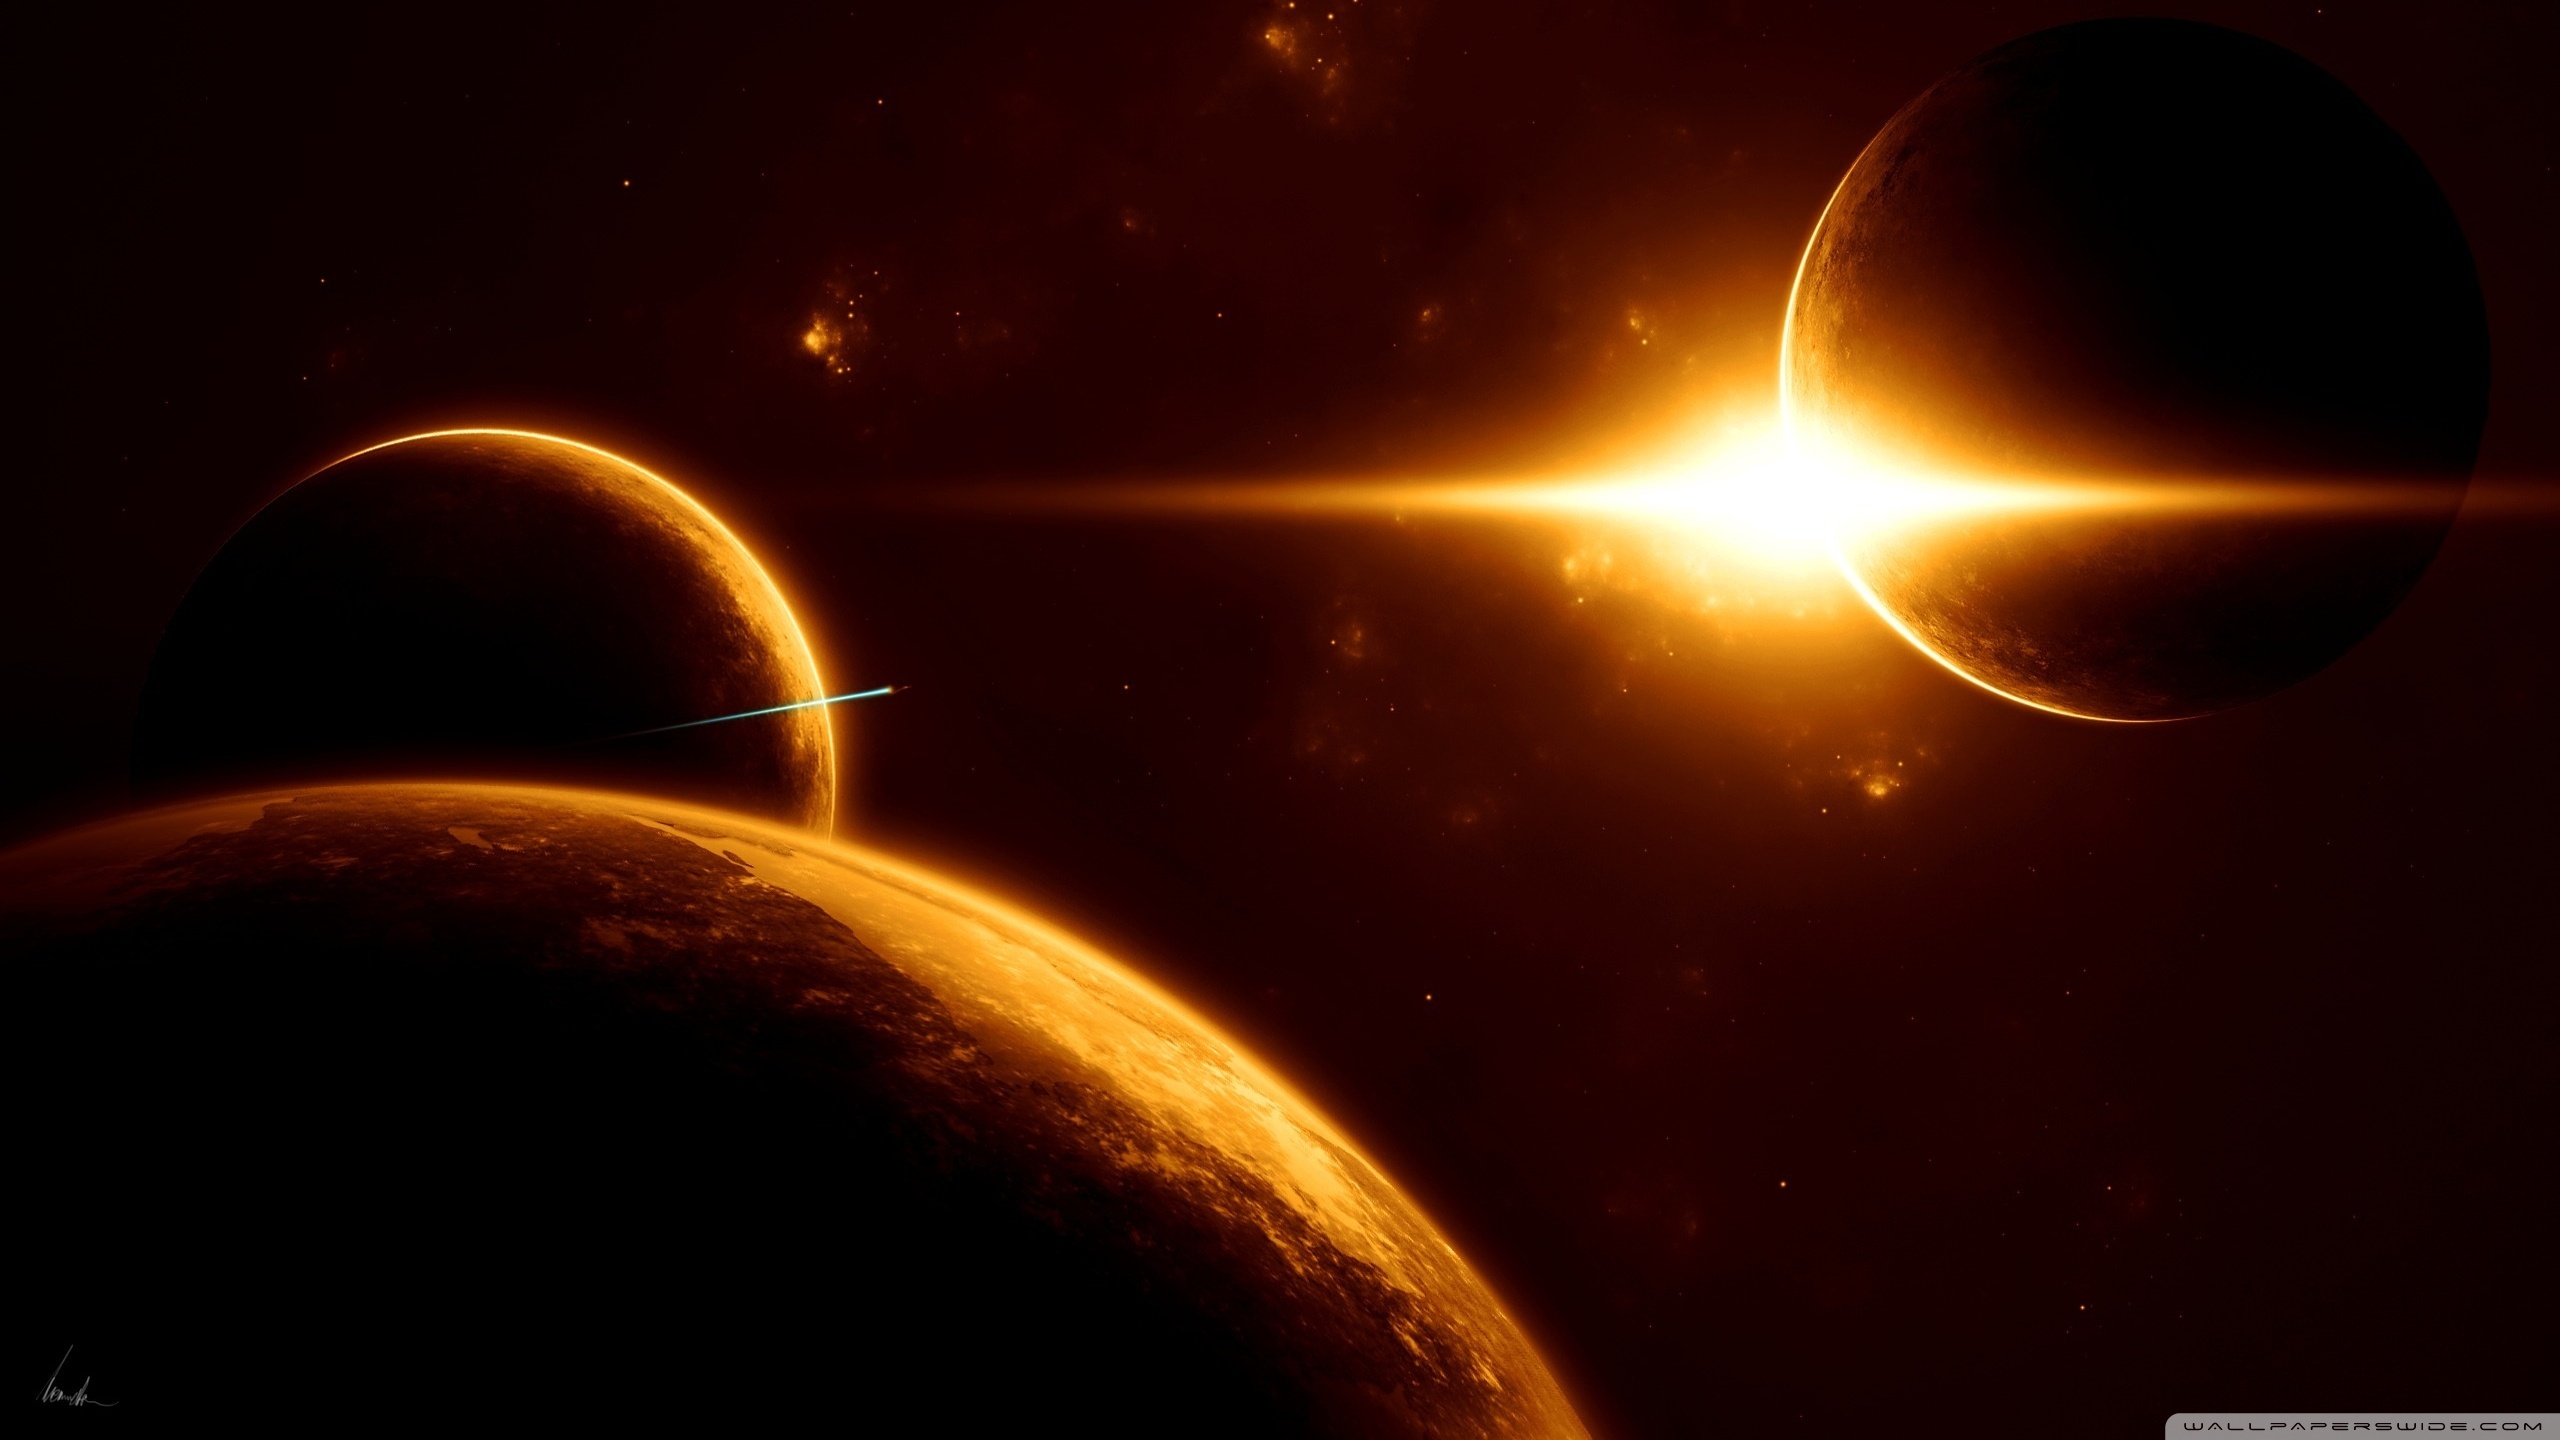 Planets And Sun Ultra HD Desktop Background Wallpaper for 4K UHD TV, Tablet